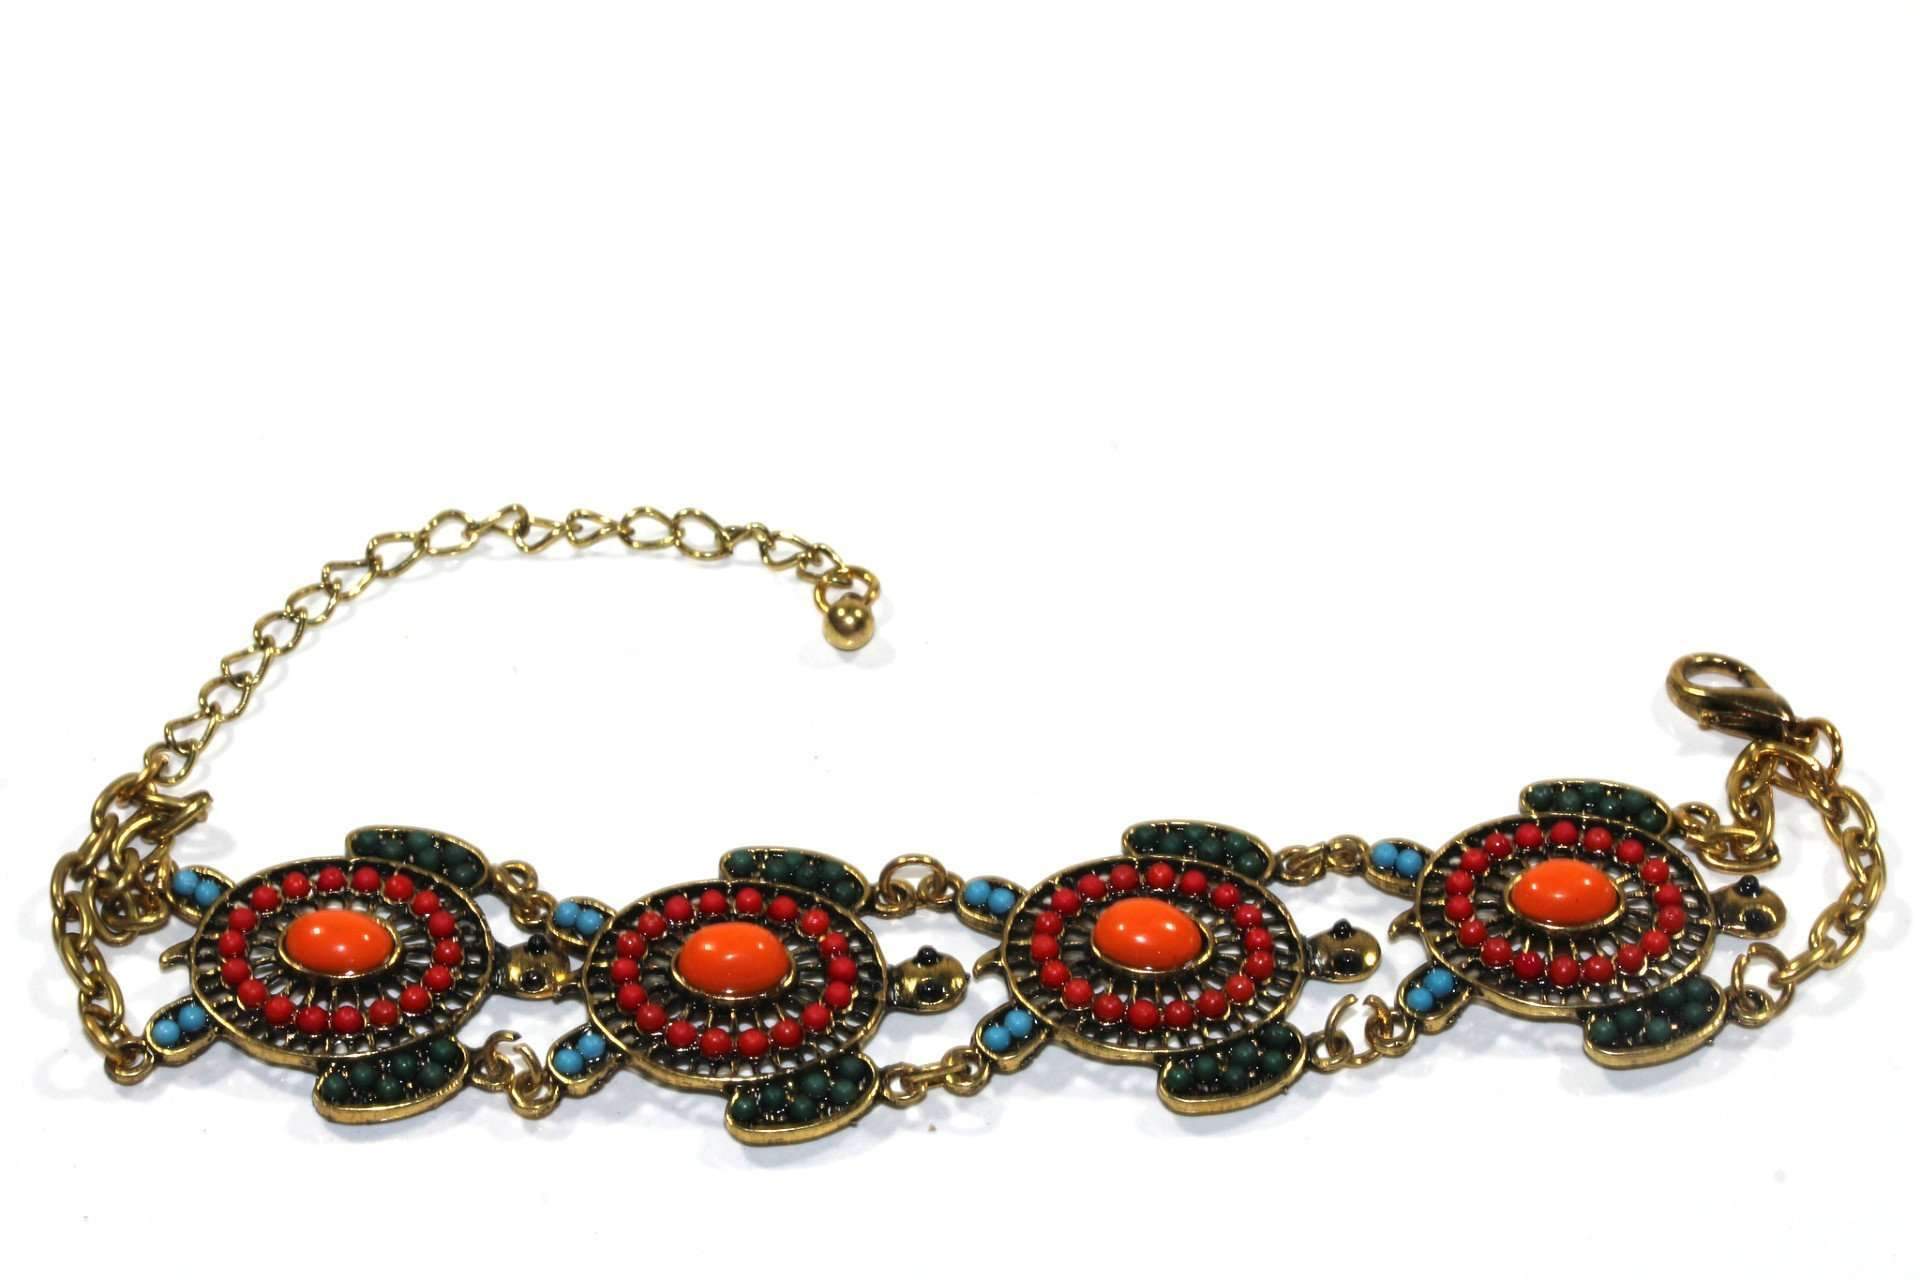 Colorful Bead Drop Turtle Bracelet - Handmade with Gold Tone Finish and Colorful Beads, Available in Different Colors, 7.5 Inches with Extender, Lobster Clasp Closure. Bijou Her